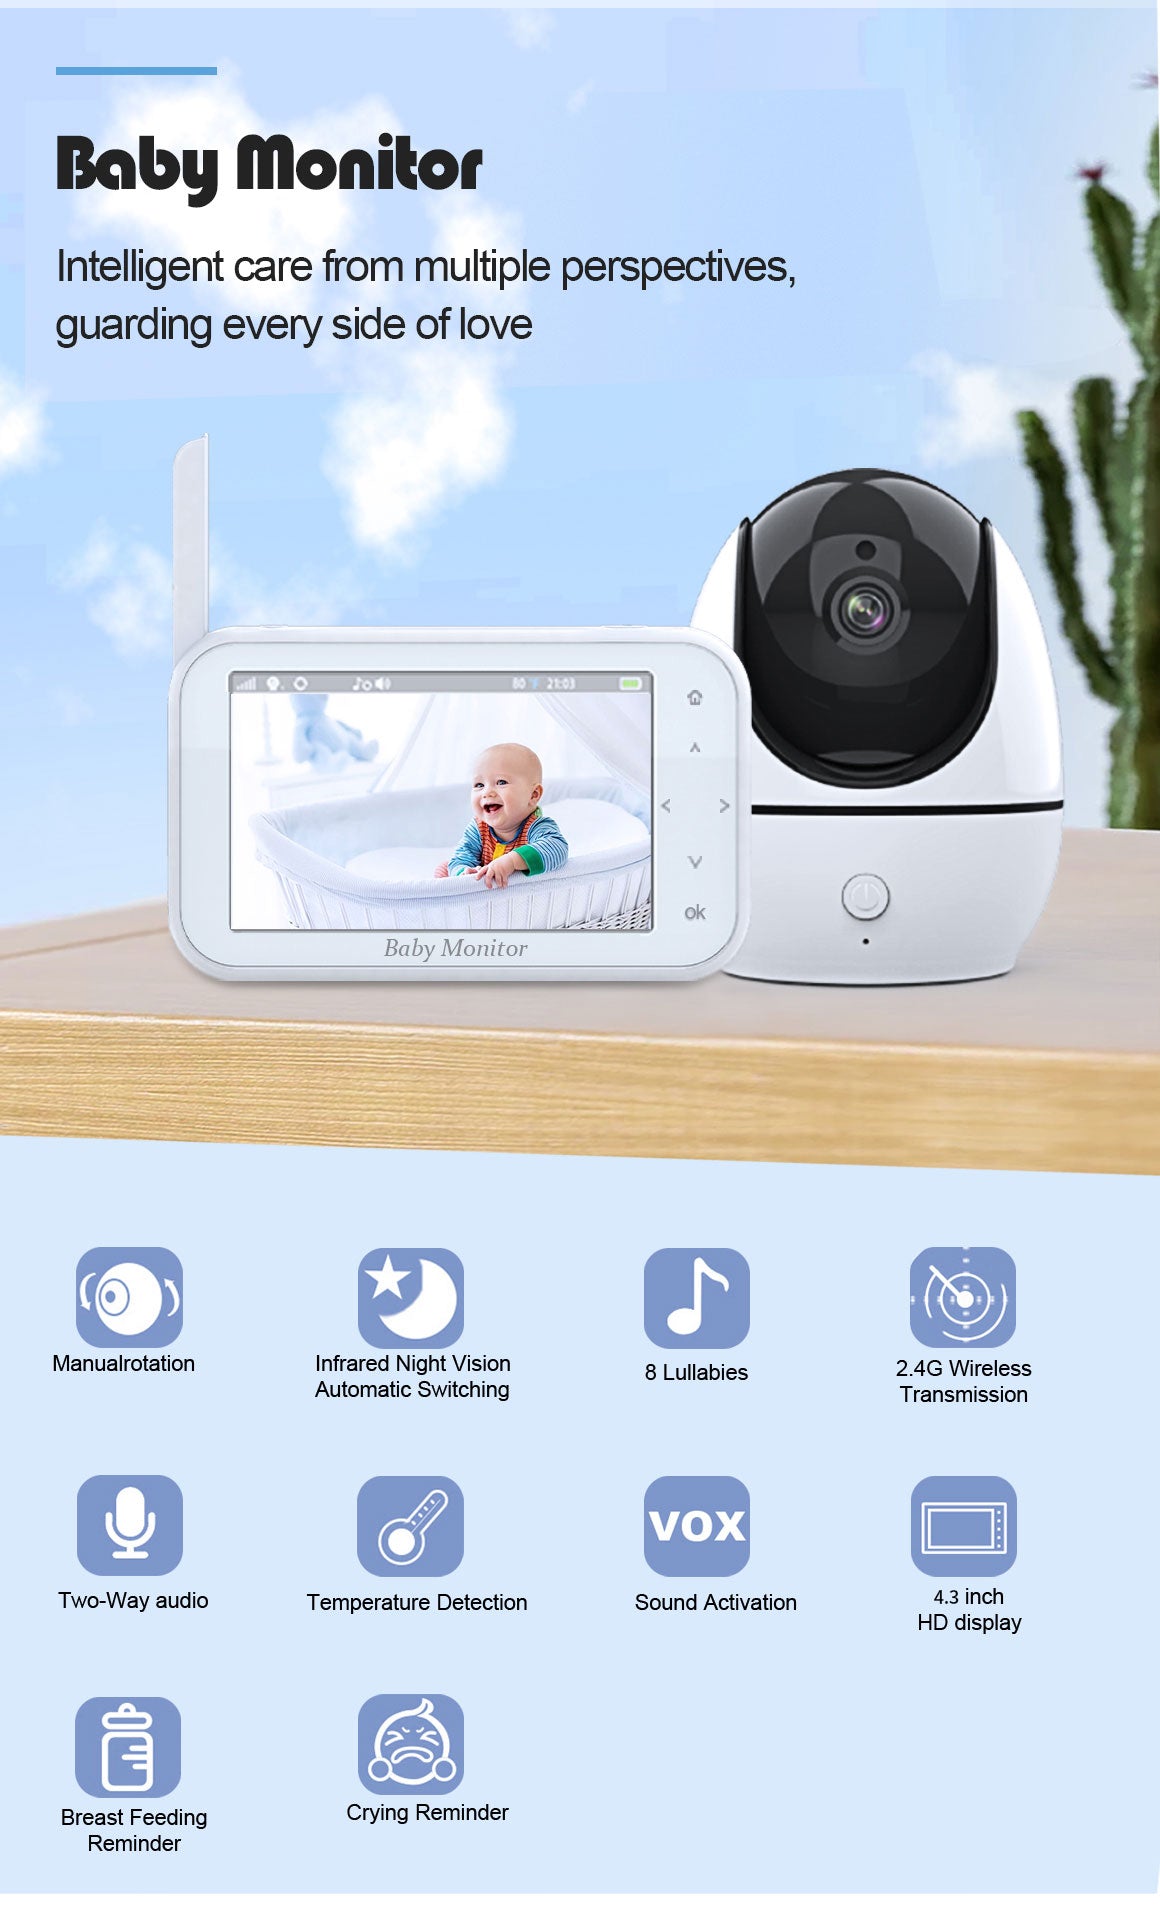 Remote Pan-Tilt Video Baby Monitor, 4.5" LCD Screen, Up to 12 Hrs Video Streaming,  Night Vision, Soothing Sounds, 2-Way Talk, Temperature Sensor